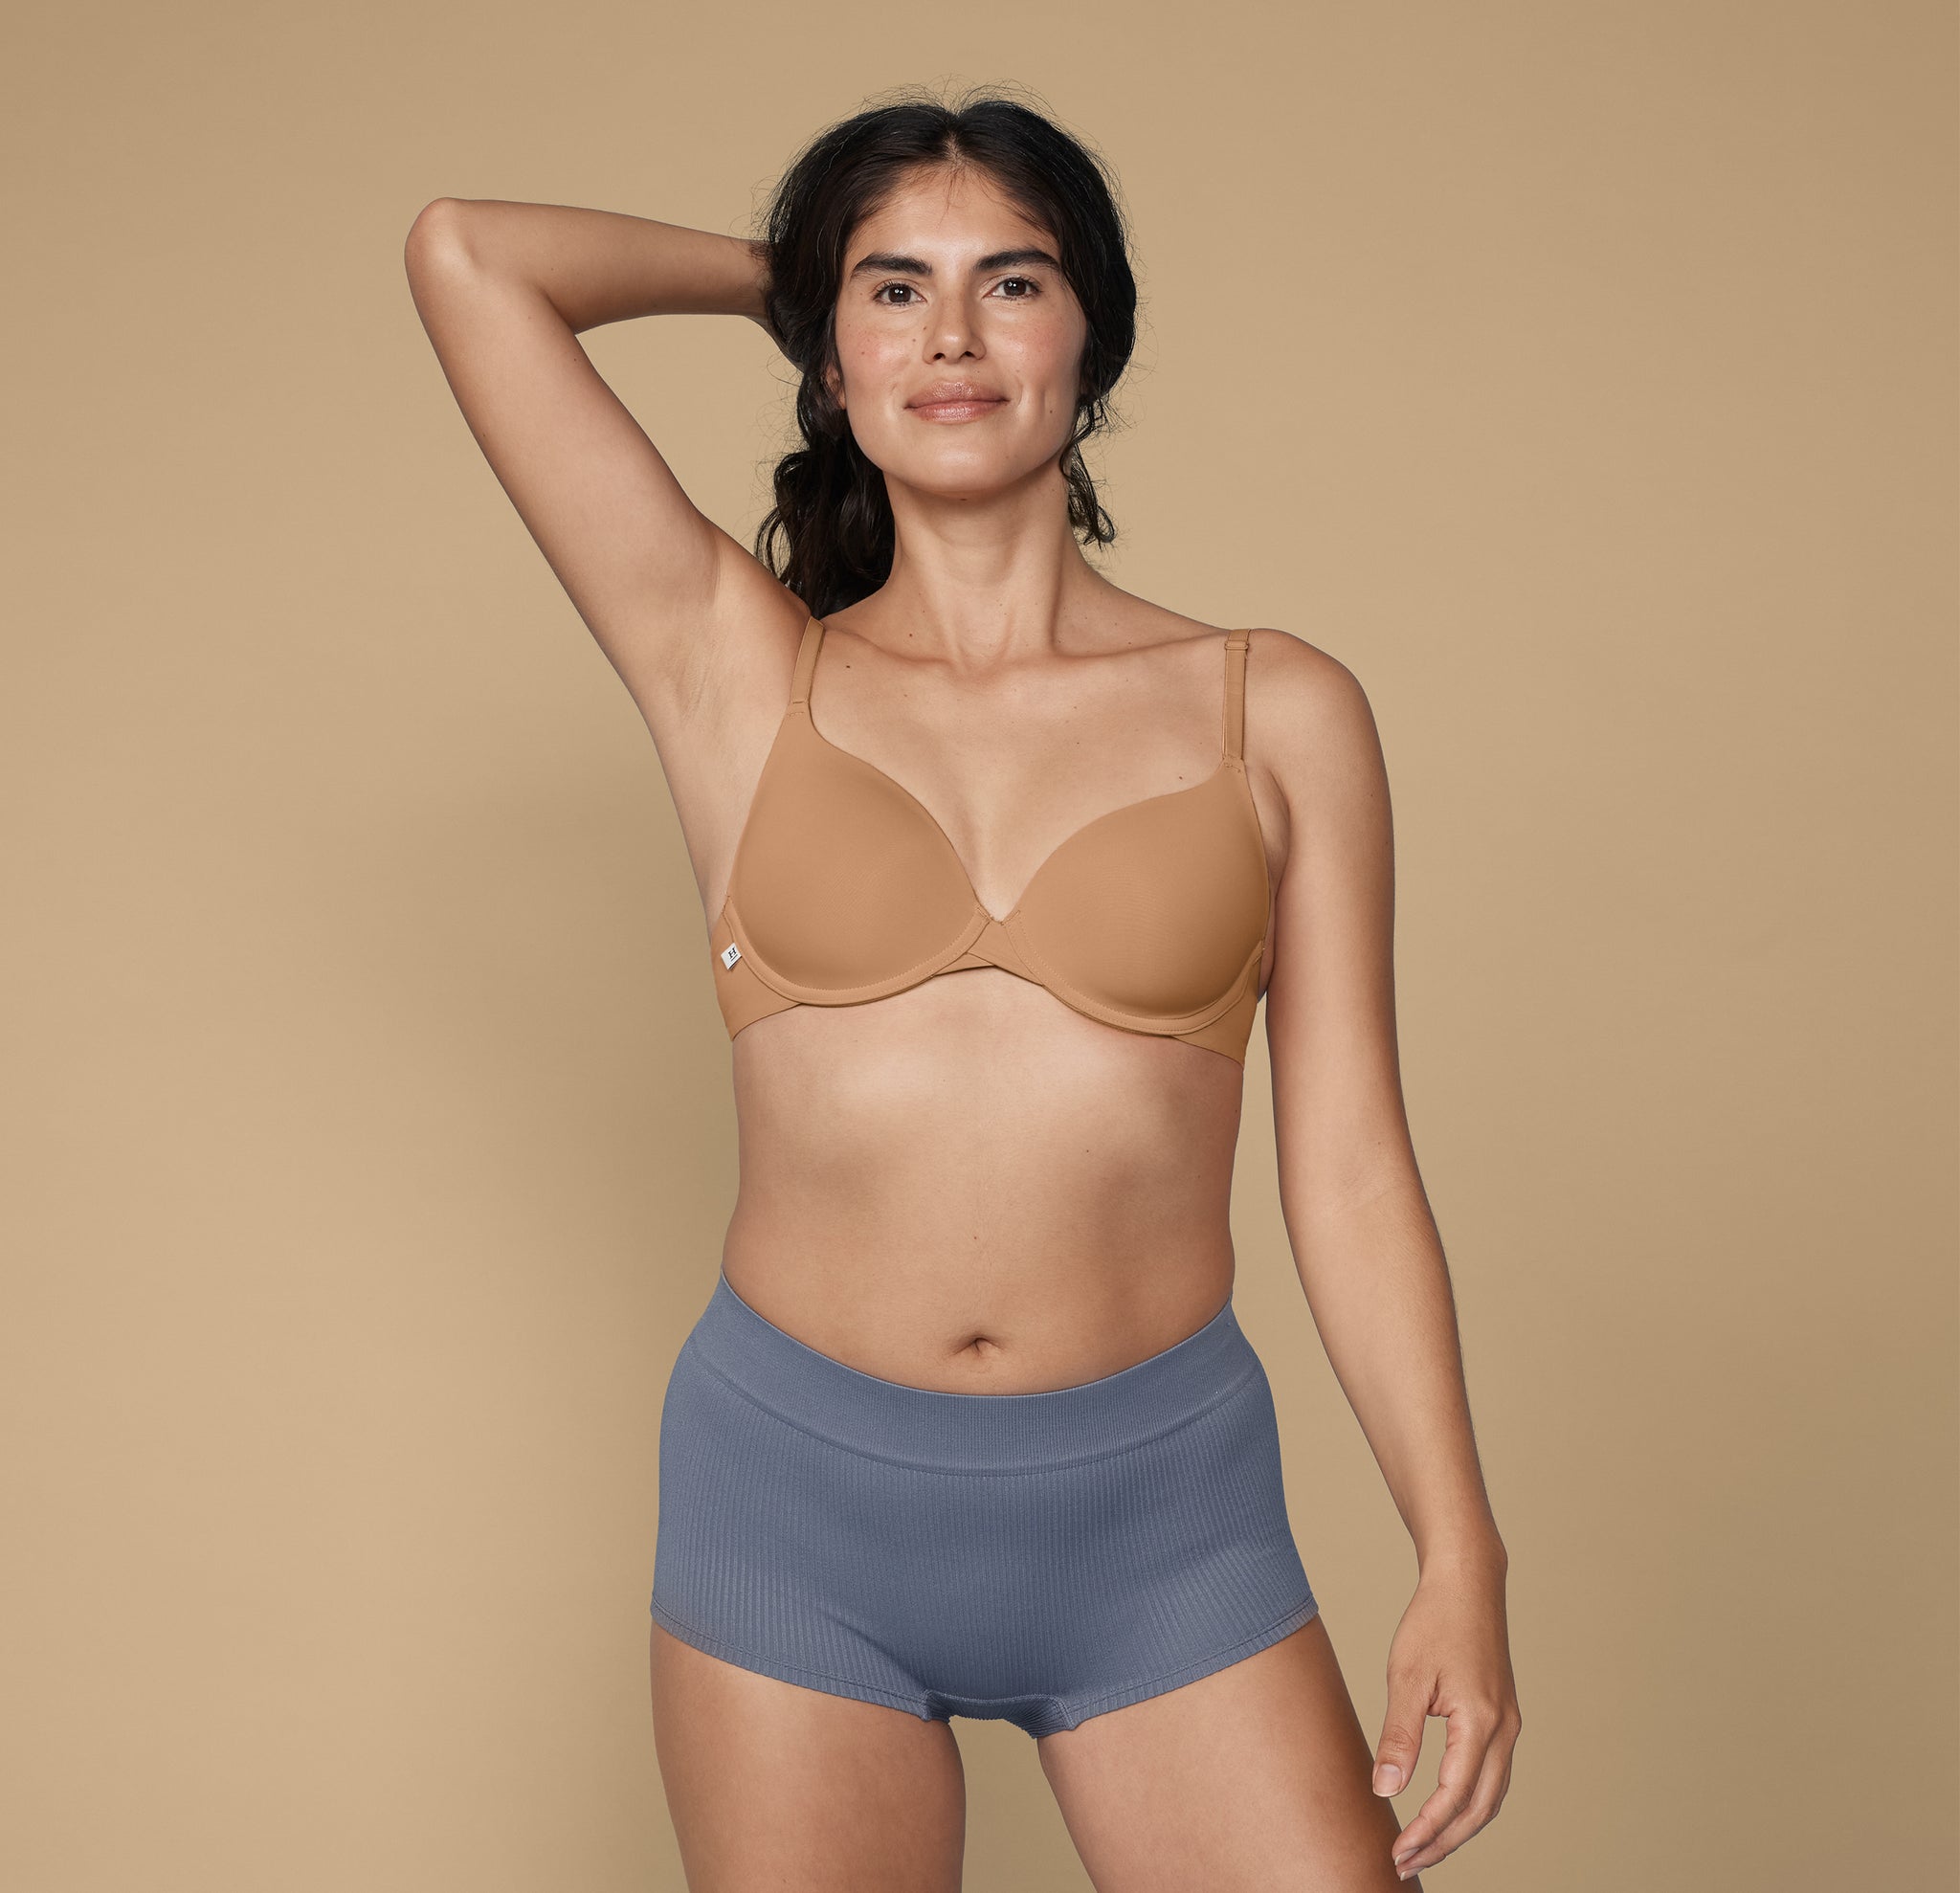 Human hand holding pink bra - Wild About Tan